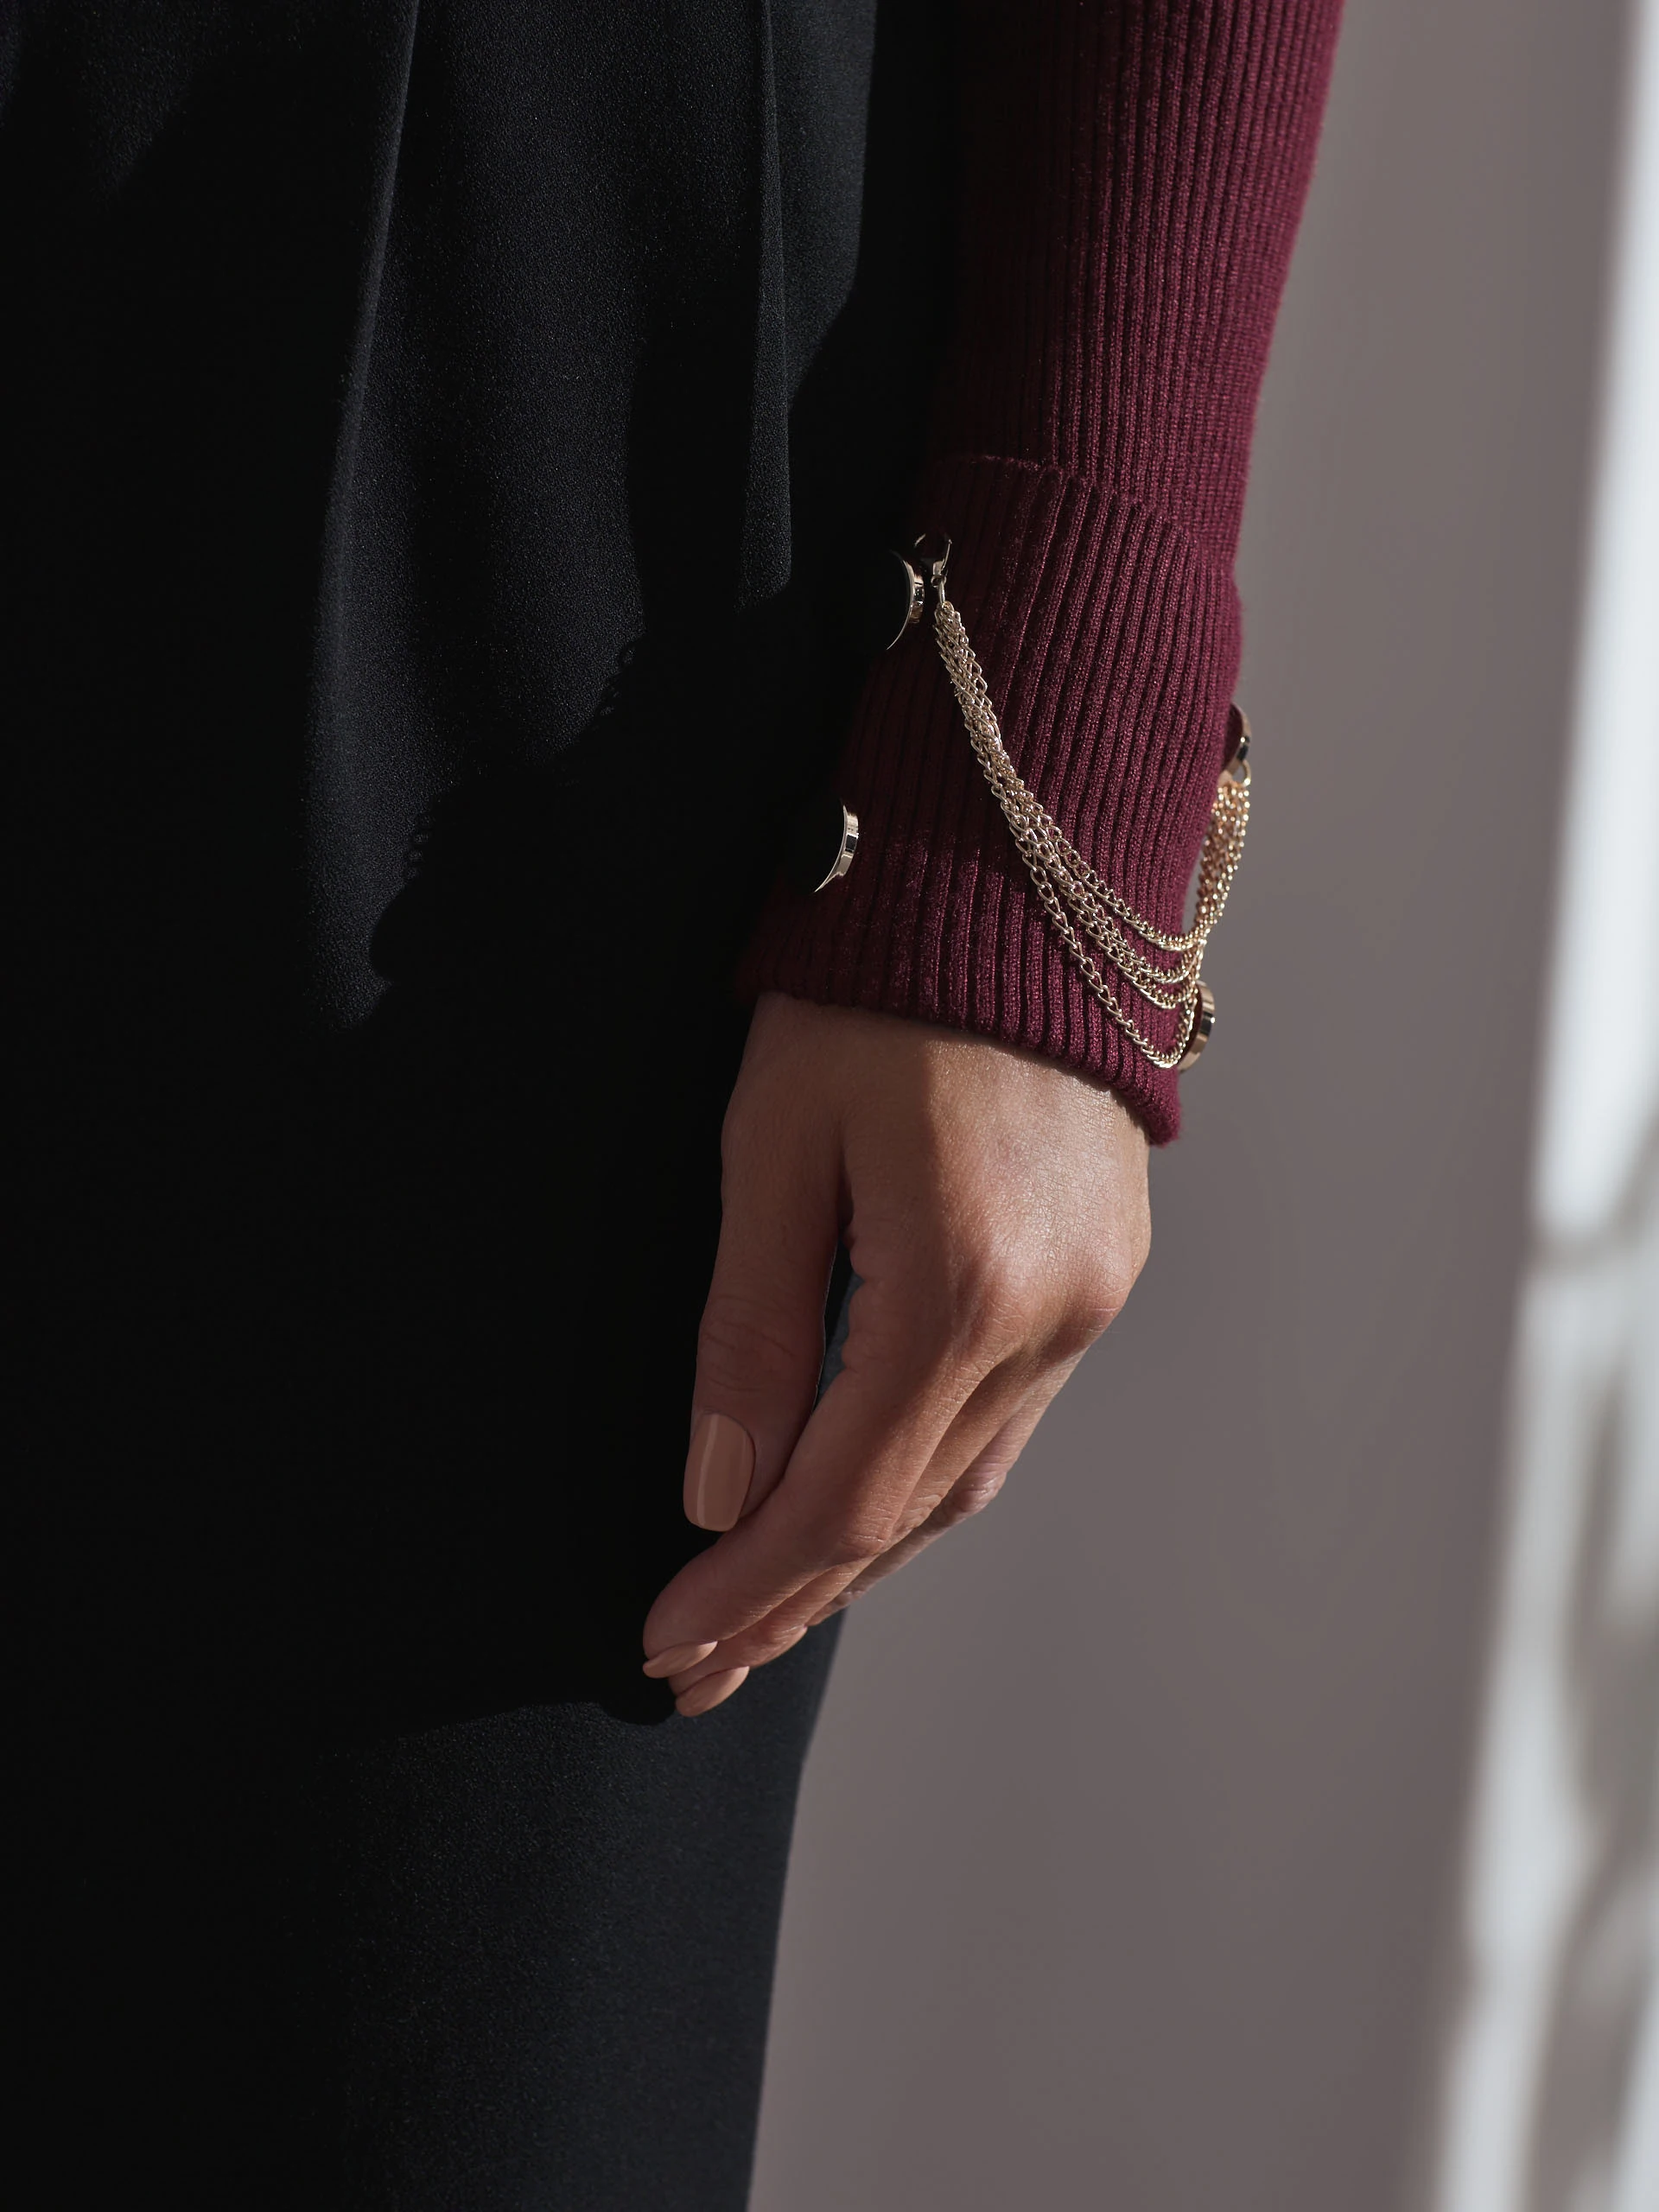 BURGUNDY TURTLENECK WITH CHAINS ON THE SLEEVES